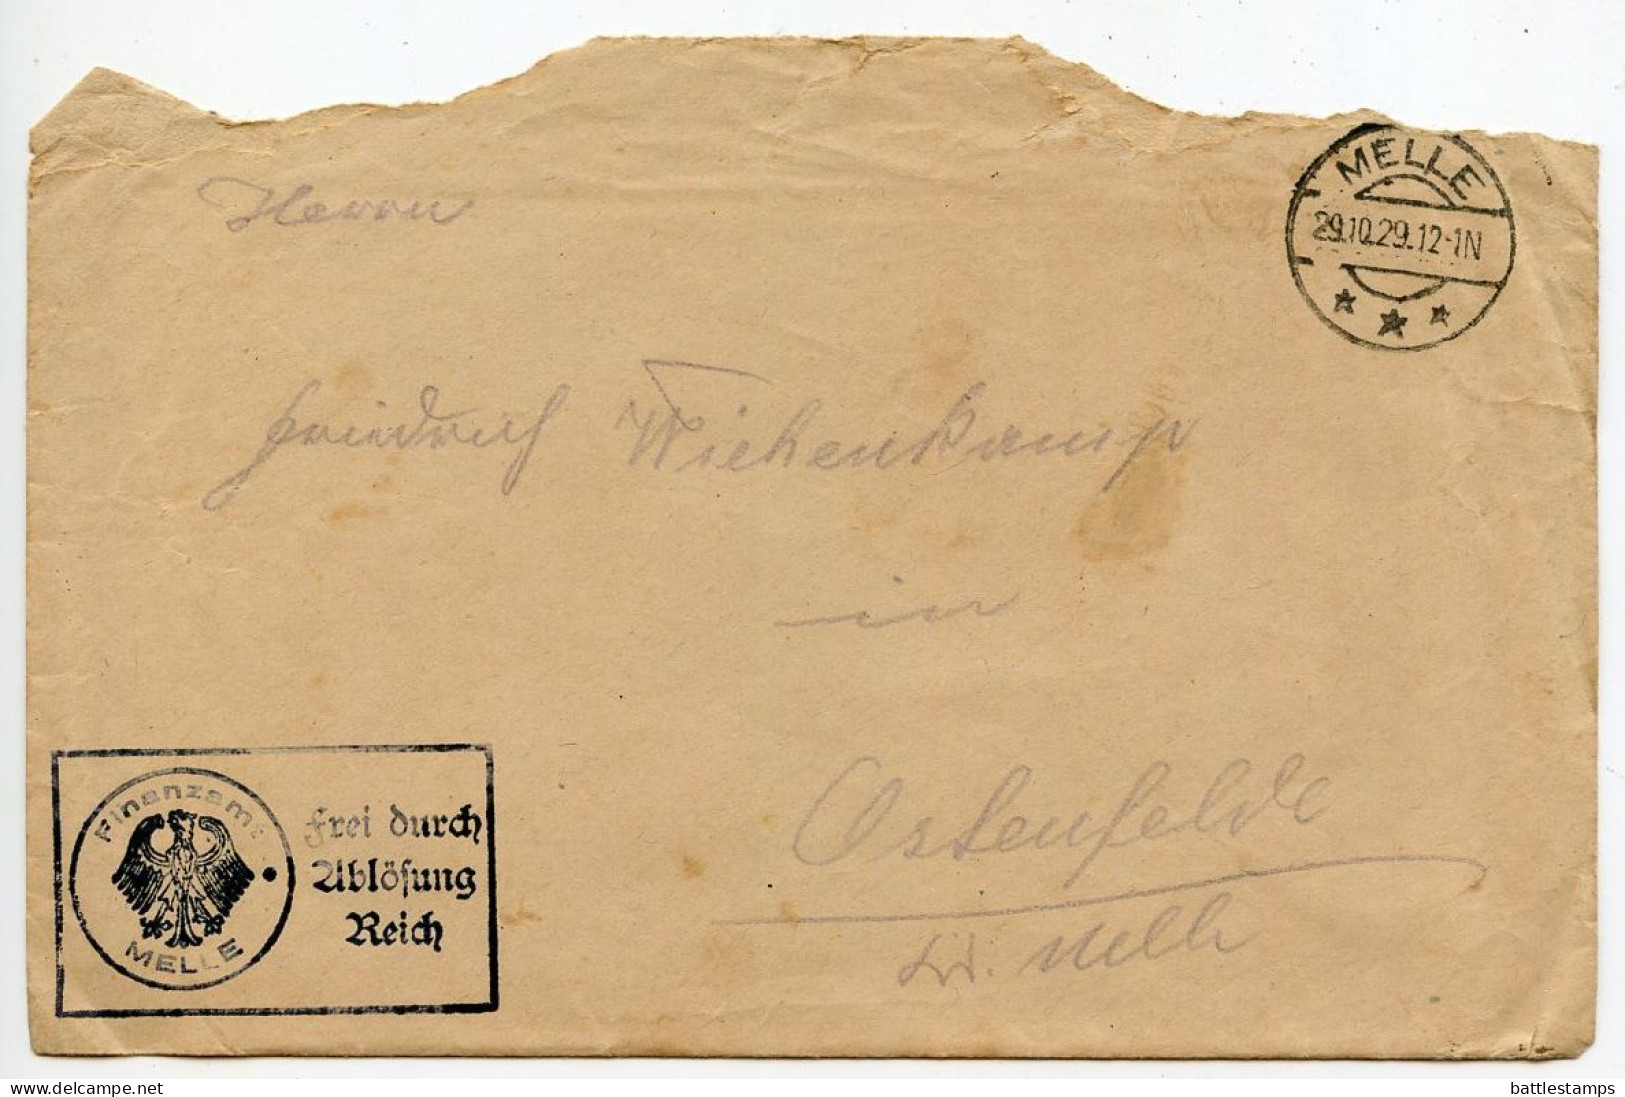 Germany 1929 Official Cover & Document; Melle - Finanzamt (Tax Office) To Ostenfelde; Motor Vehicle Tax Card Renewal - Covers & Documents